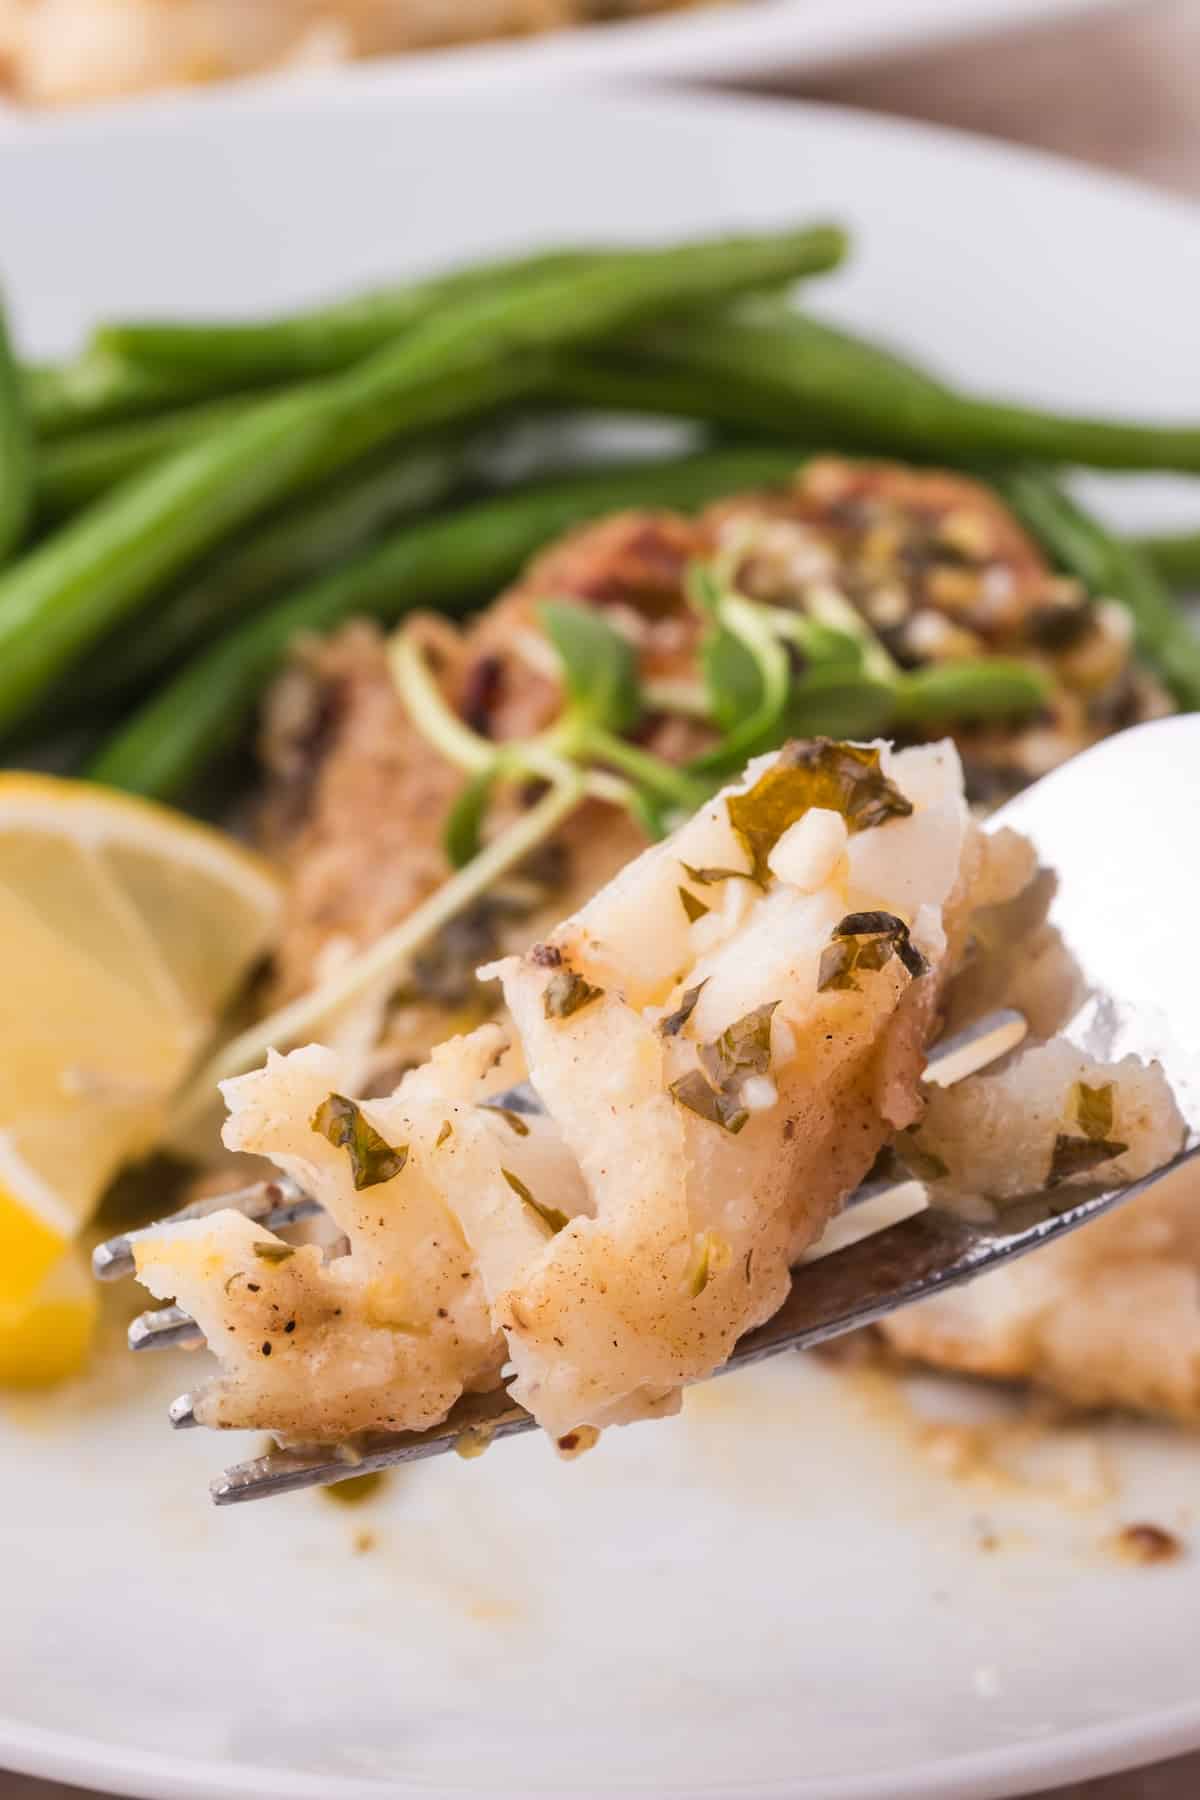 A fork is holding a piece of pan-fried cod and green beans in this seafood dish.